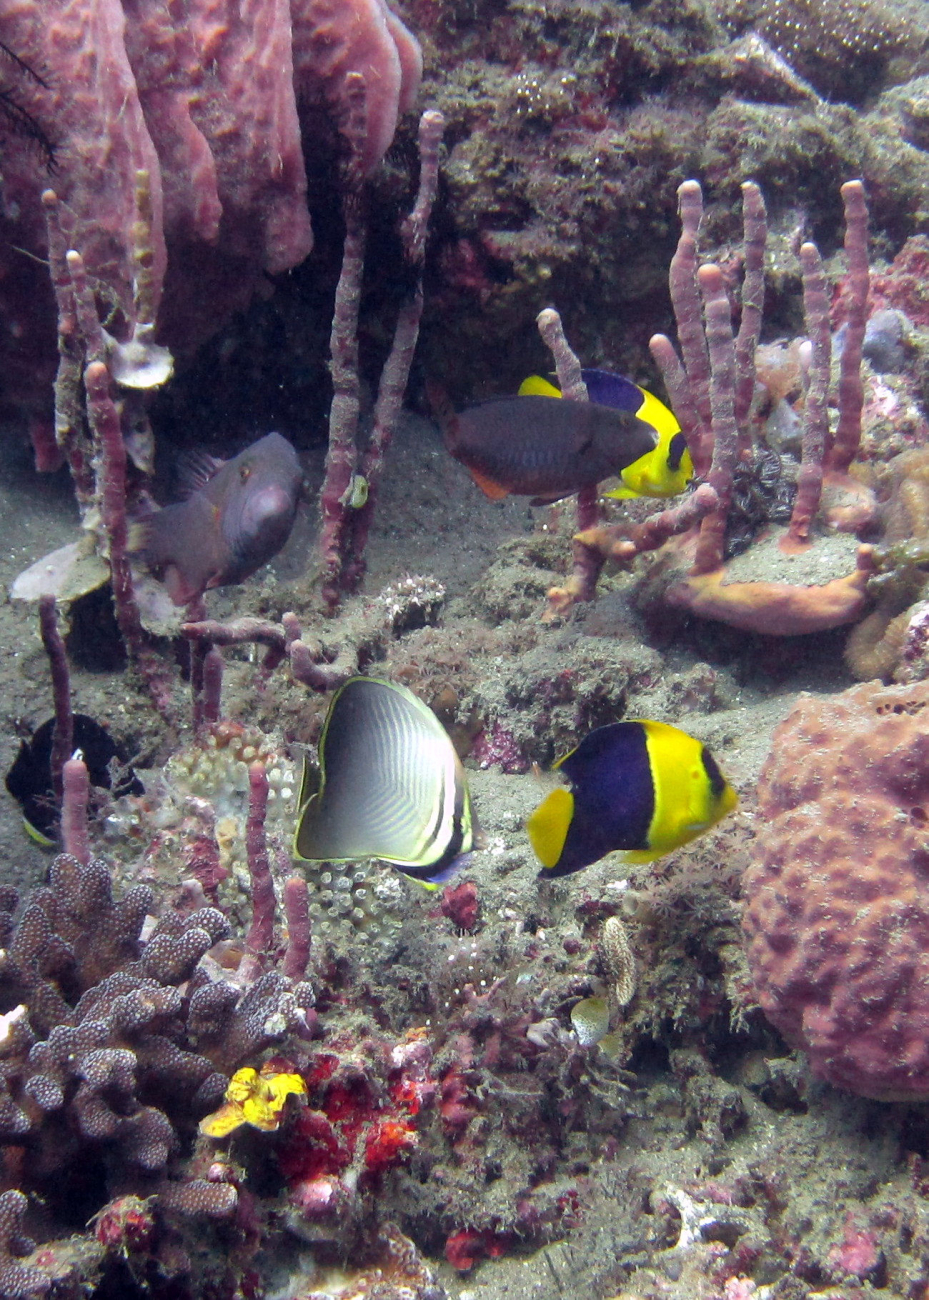 Eastern triangular butterflyfish (Chaetodon baronessa)and bicolor angelfish (Centropyge bicolor)